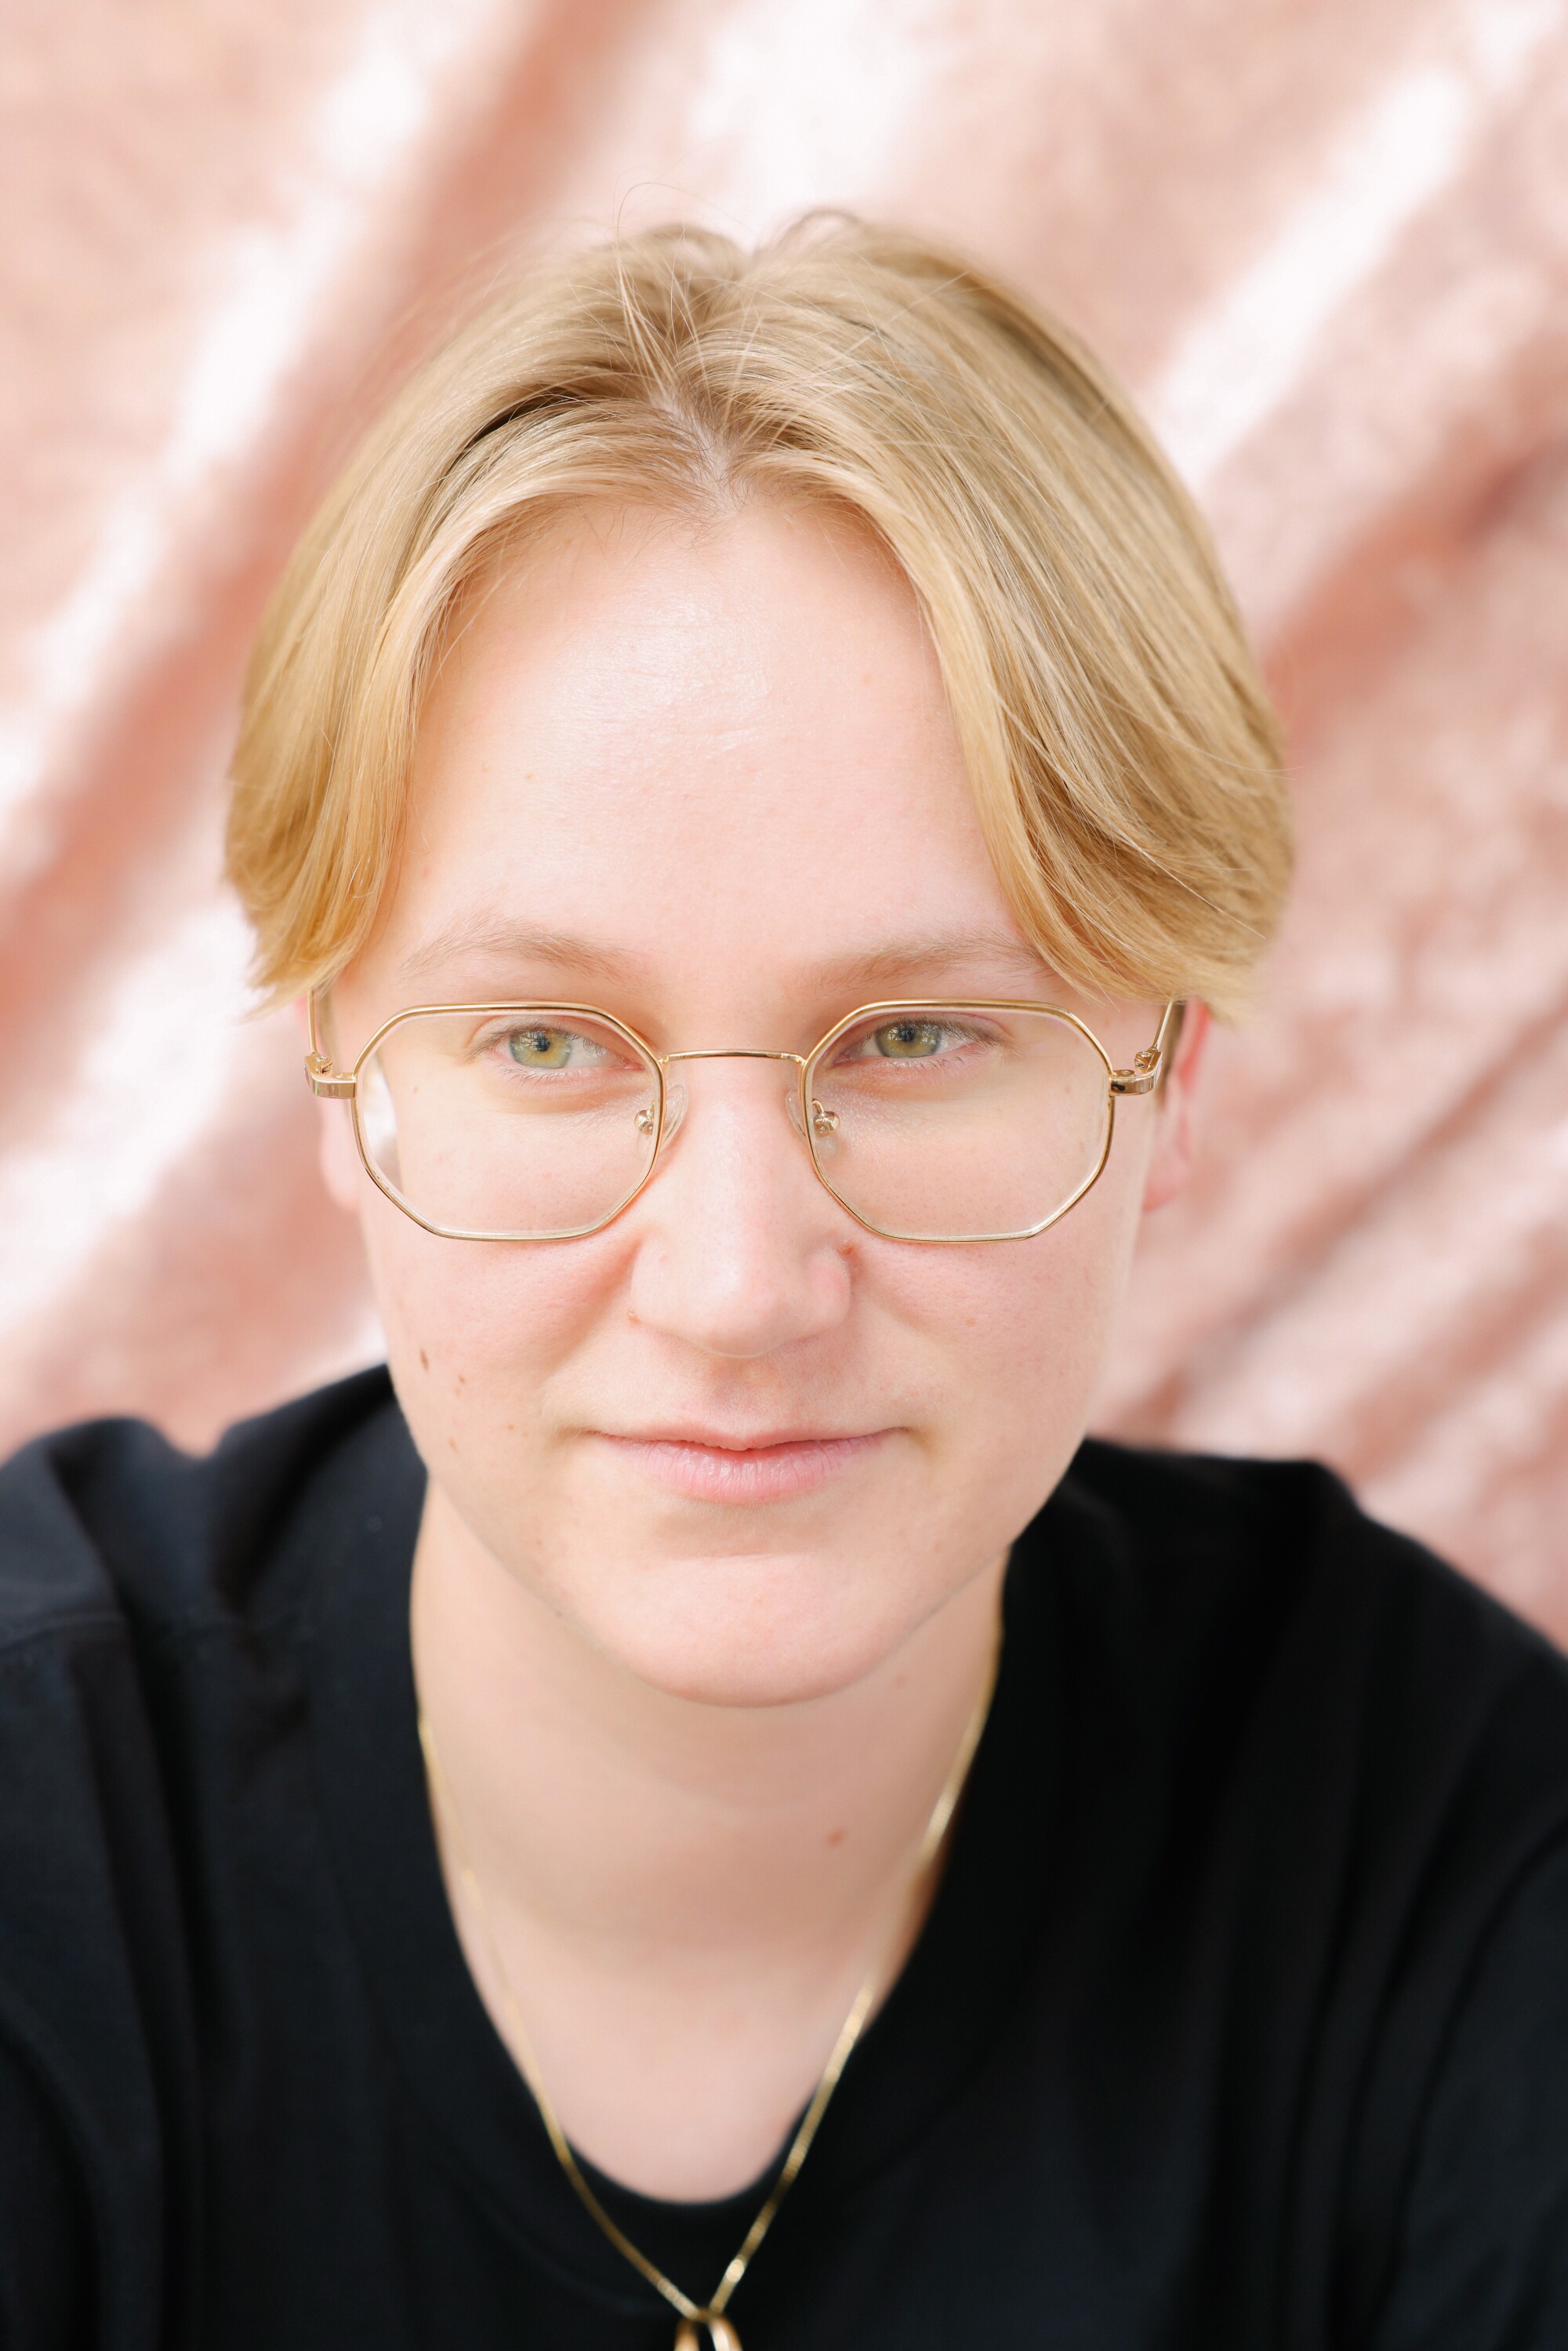 A person with glasses and short blond hair poses for a portrait